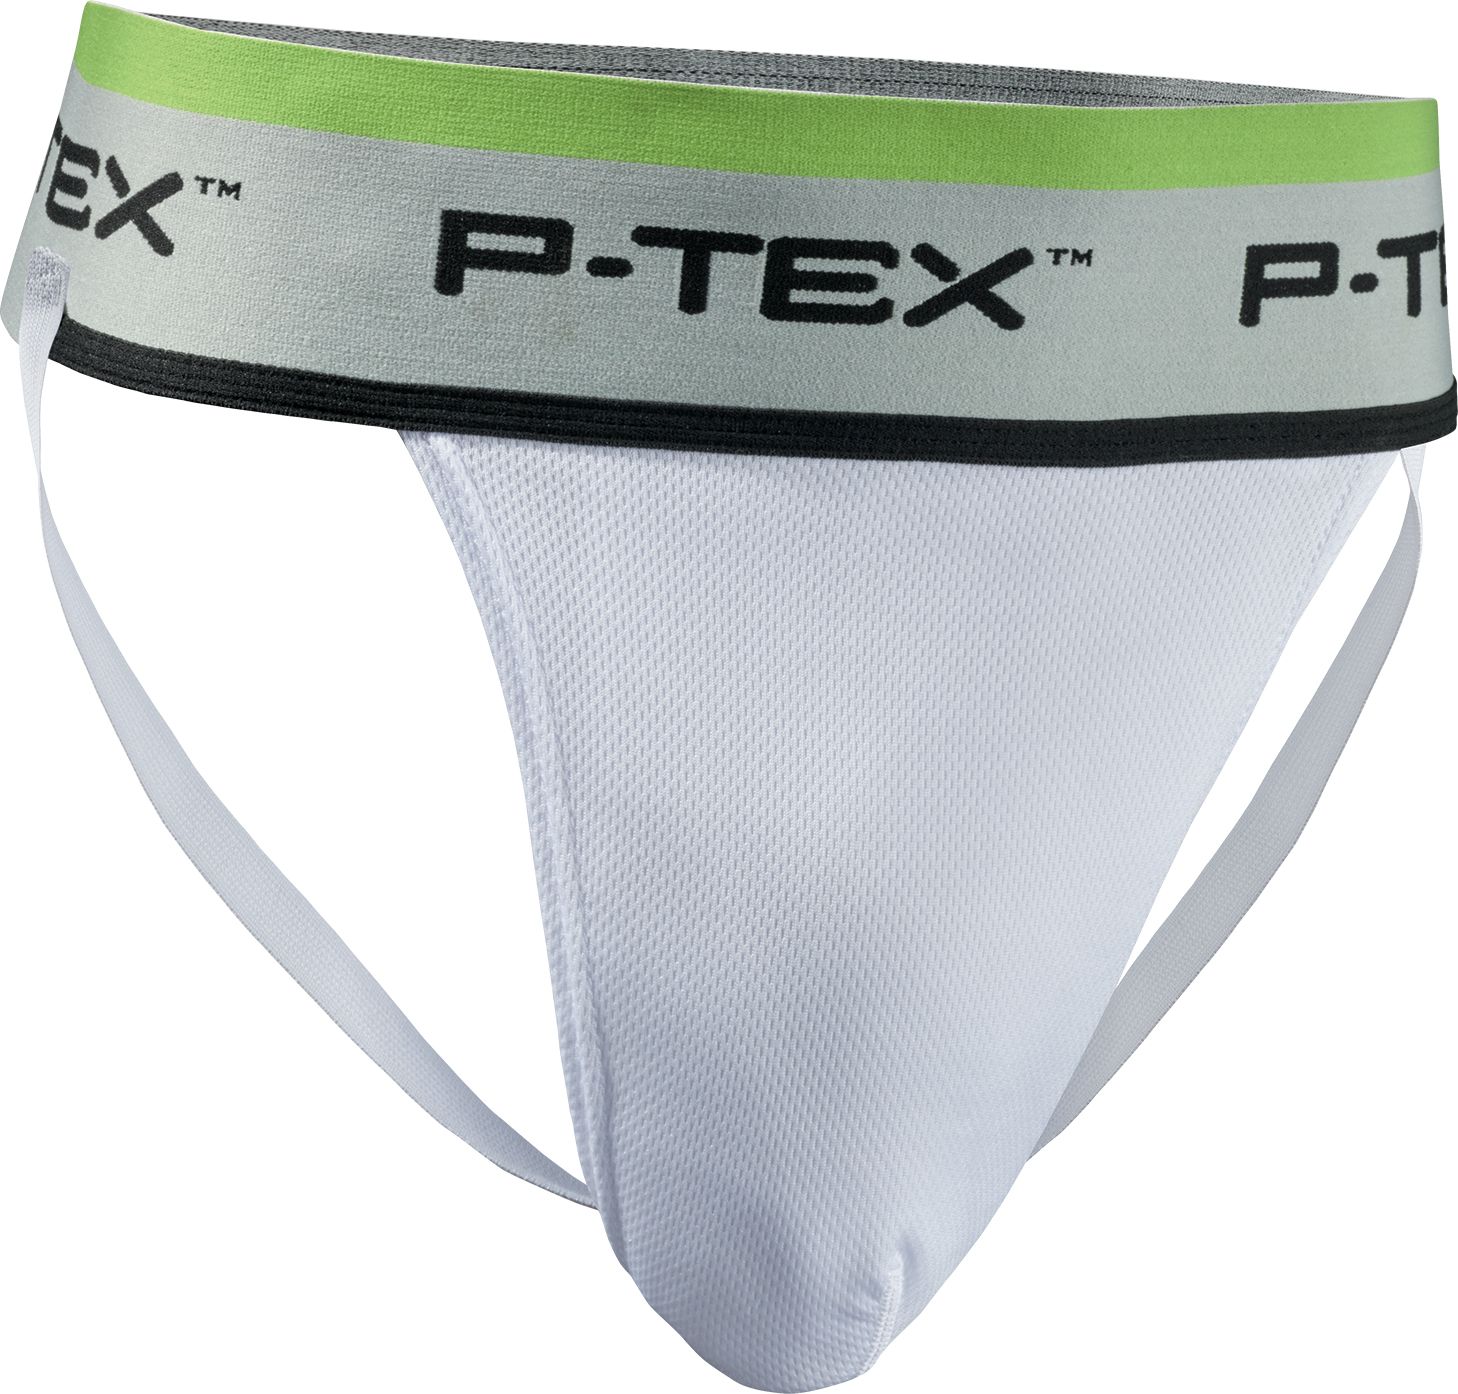 brief athletic supporter